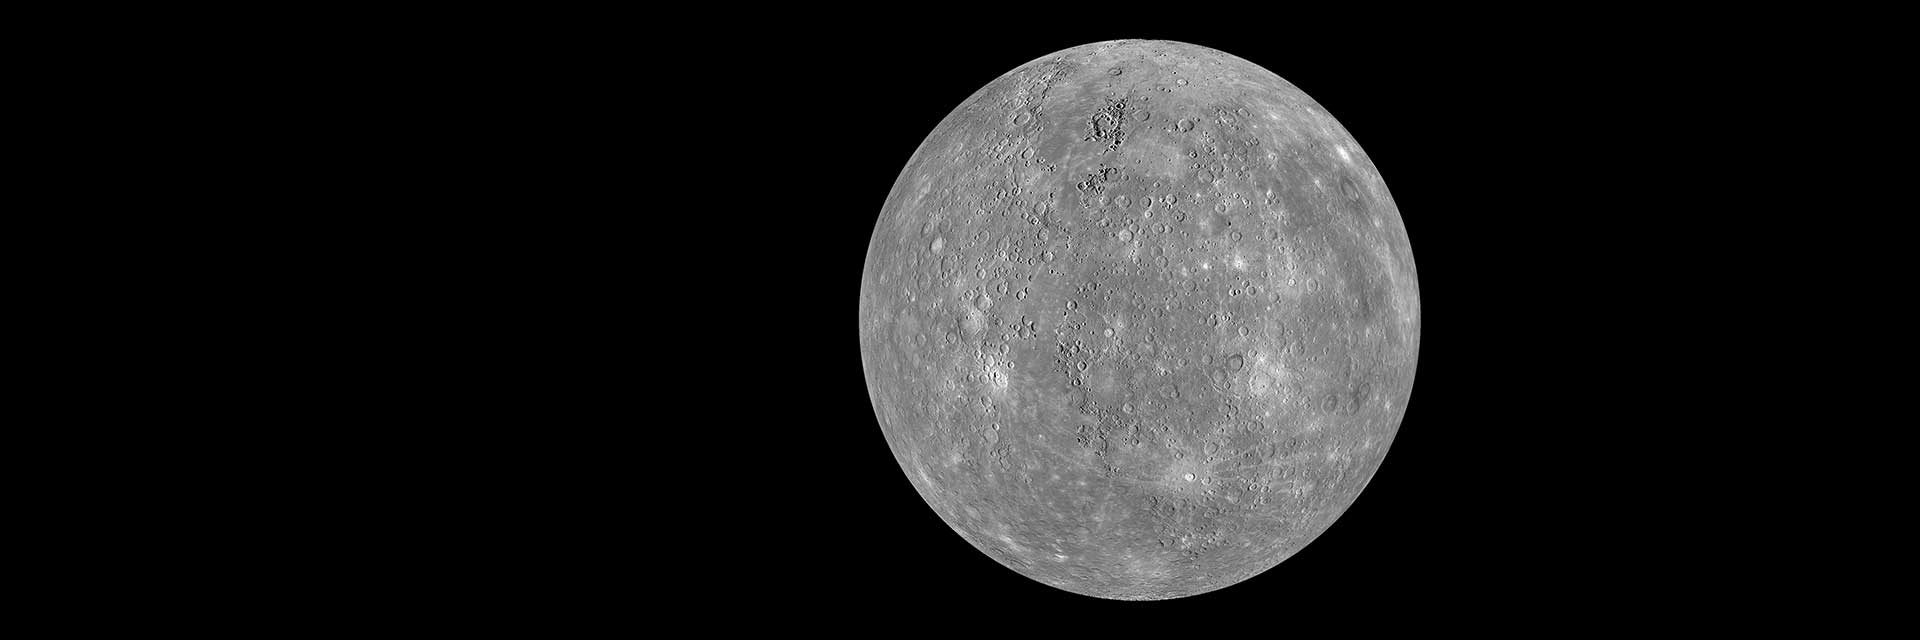 Gray planet Mercury with craters and rays of material ejected by impactors like asteroids.